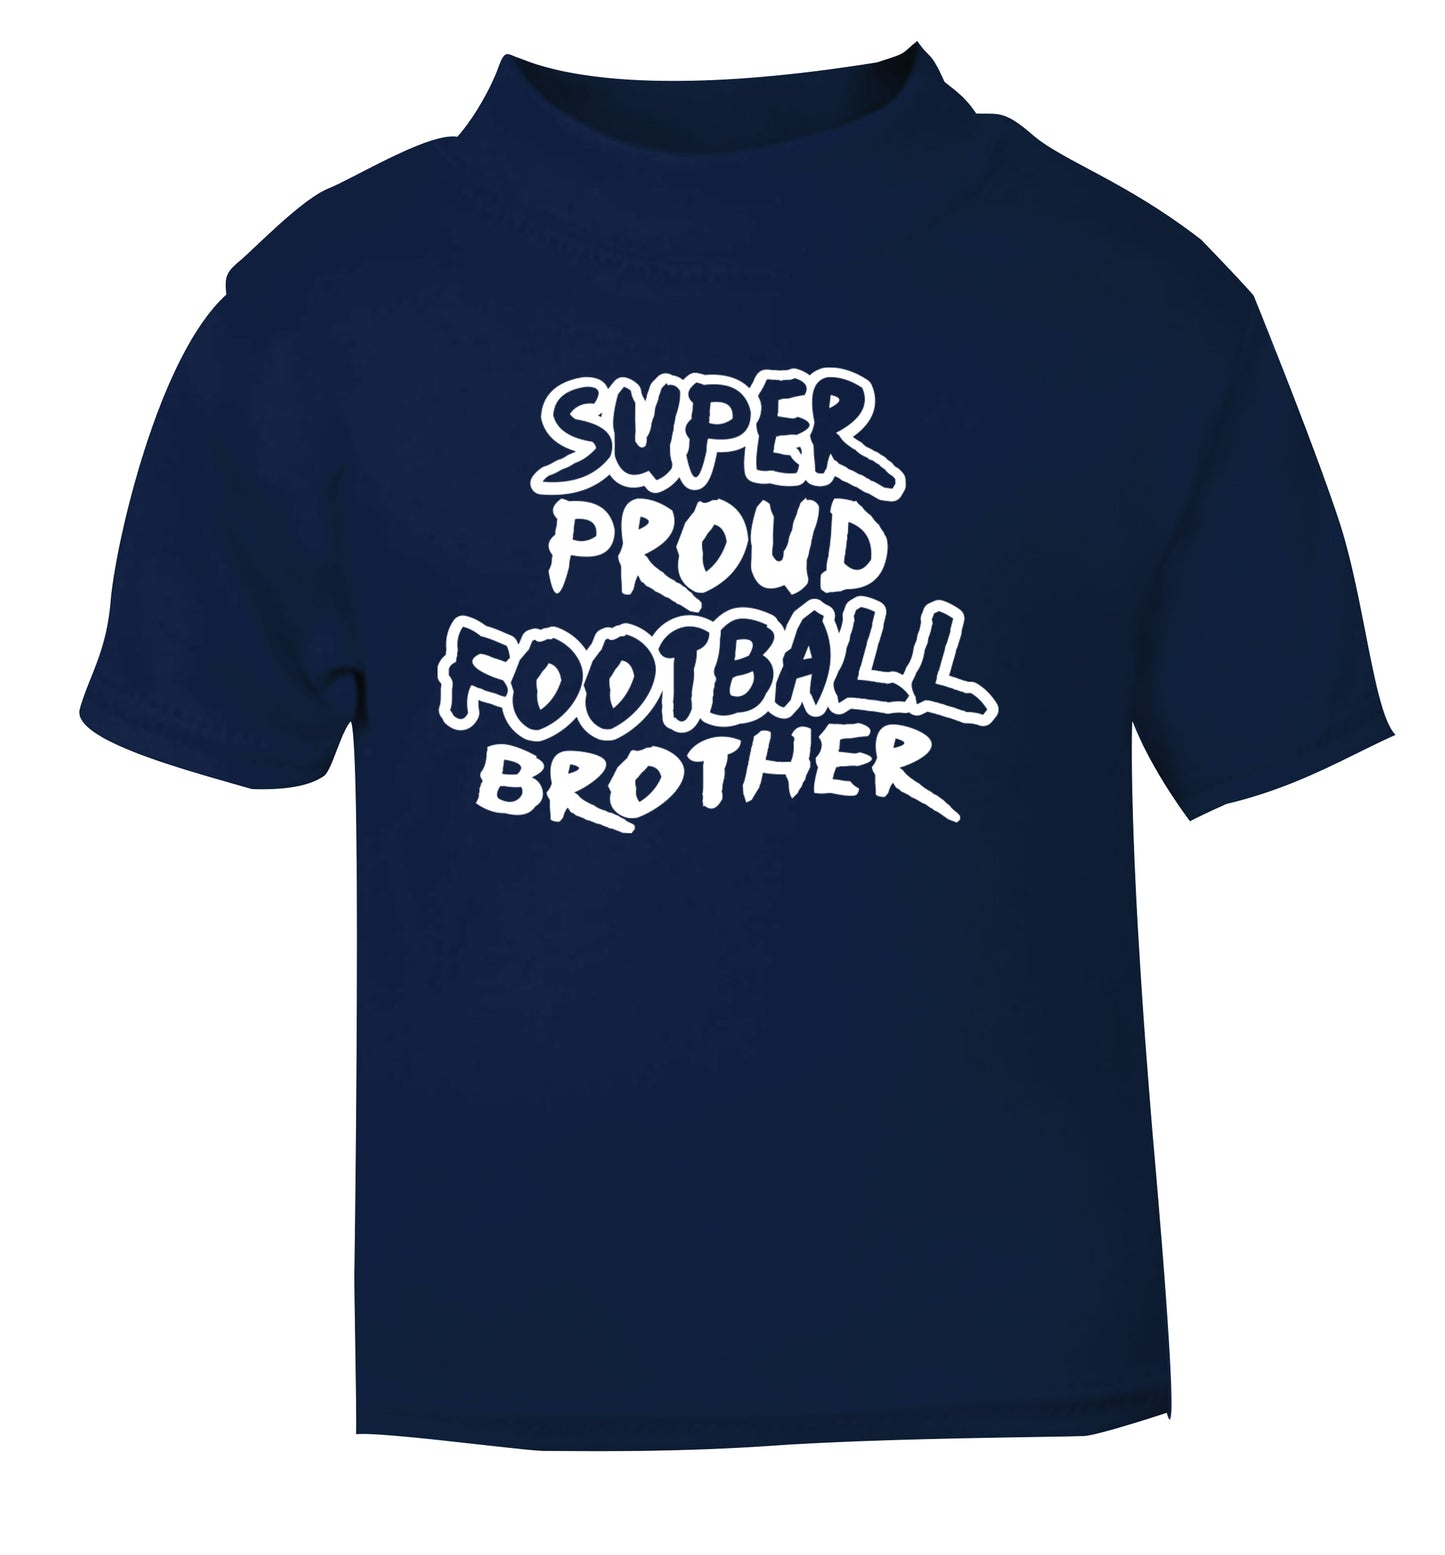 Super proud football brother navy Baby Toddler Tshirt 2 Years